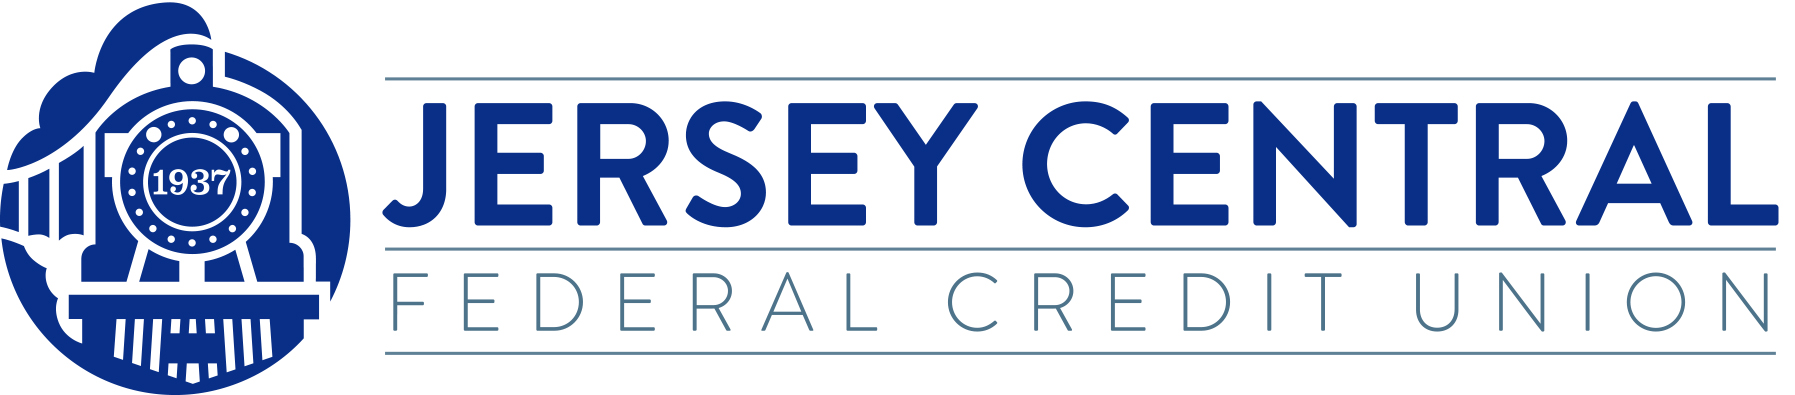 Jersey Central Federal Credit Union